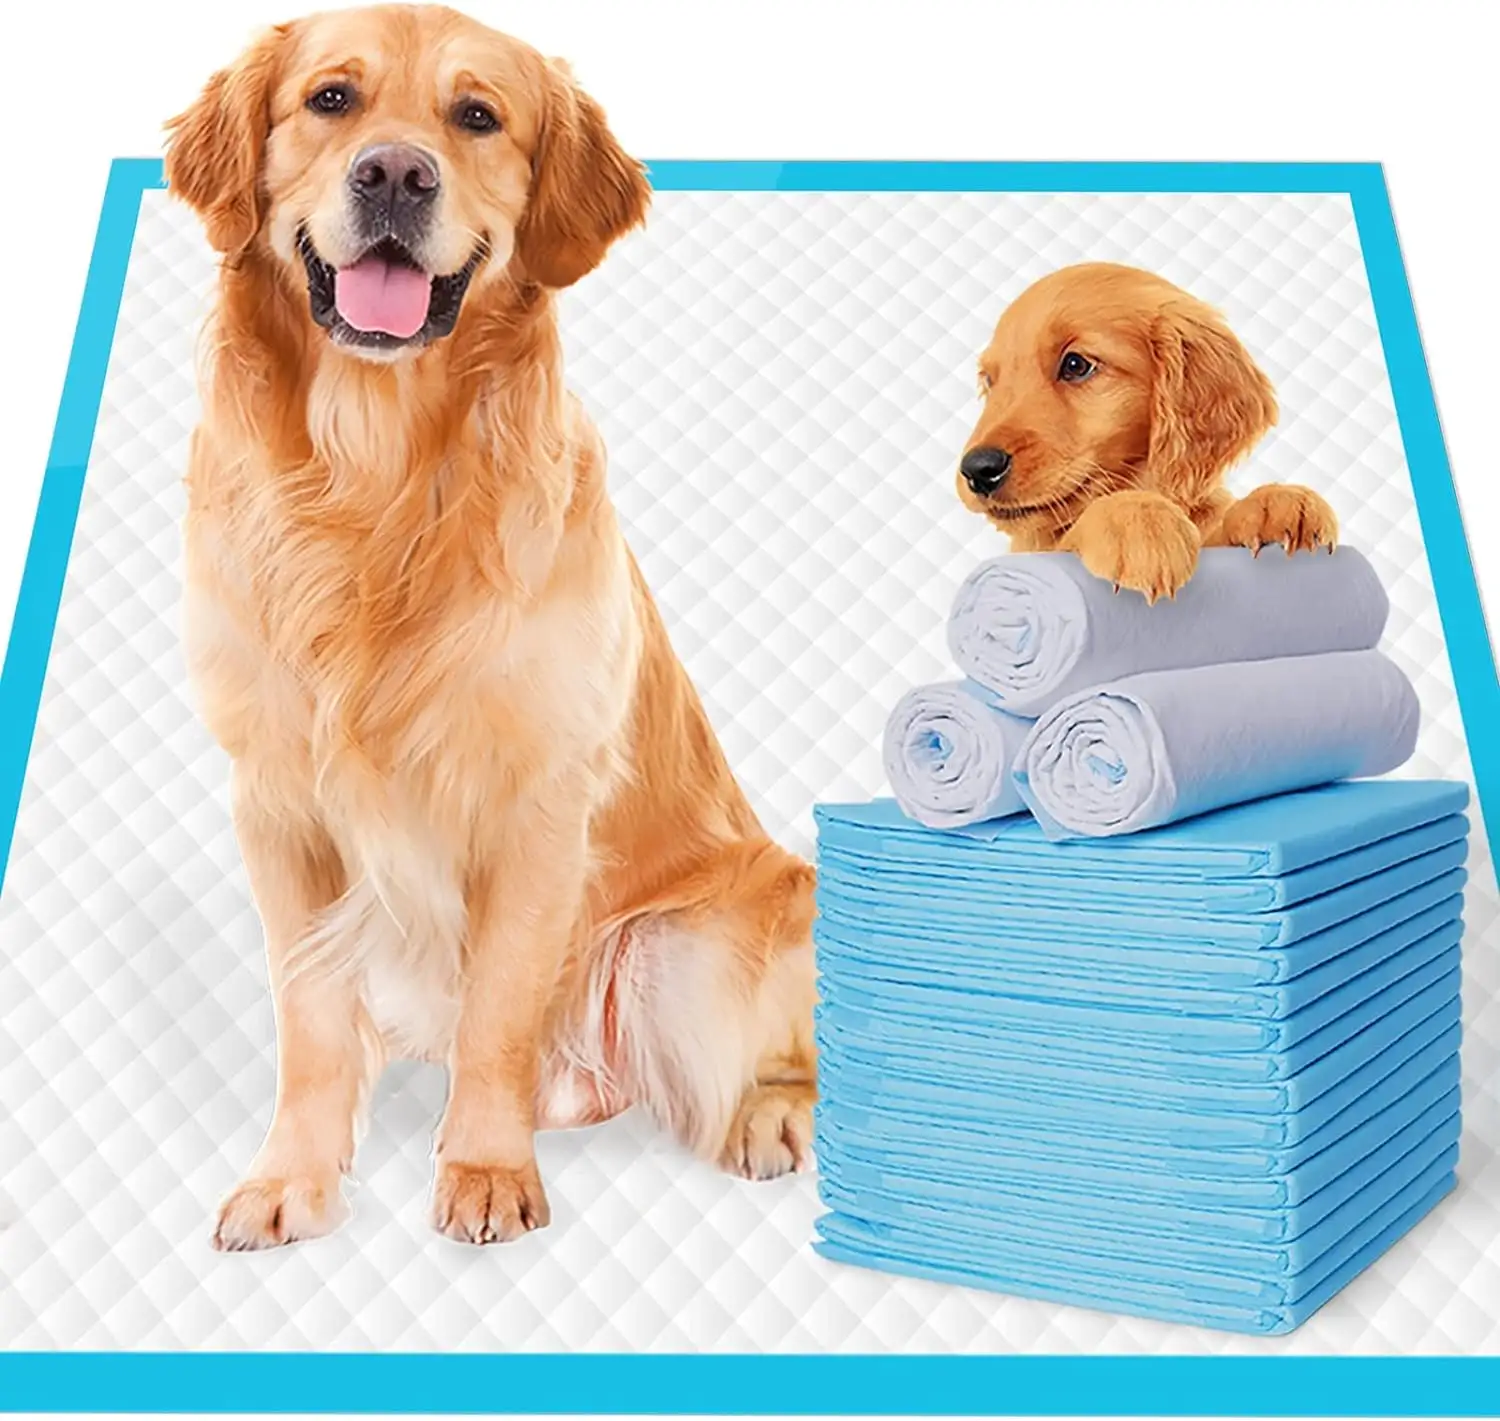 Singapore and Japan Lane Linen Dog Pee Pads with Leak Proof Quick Dry Design for Potty Training